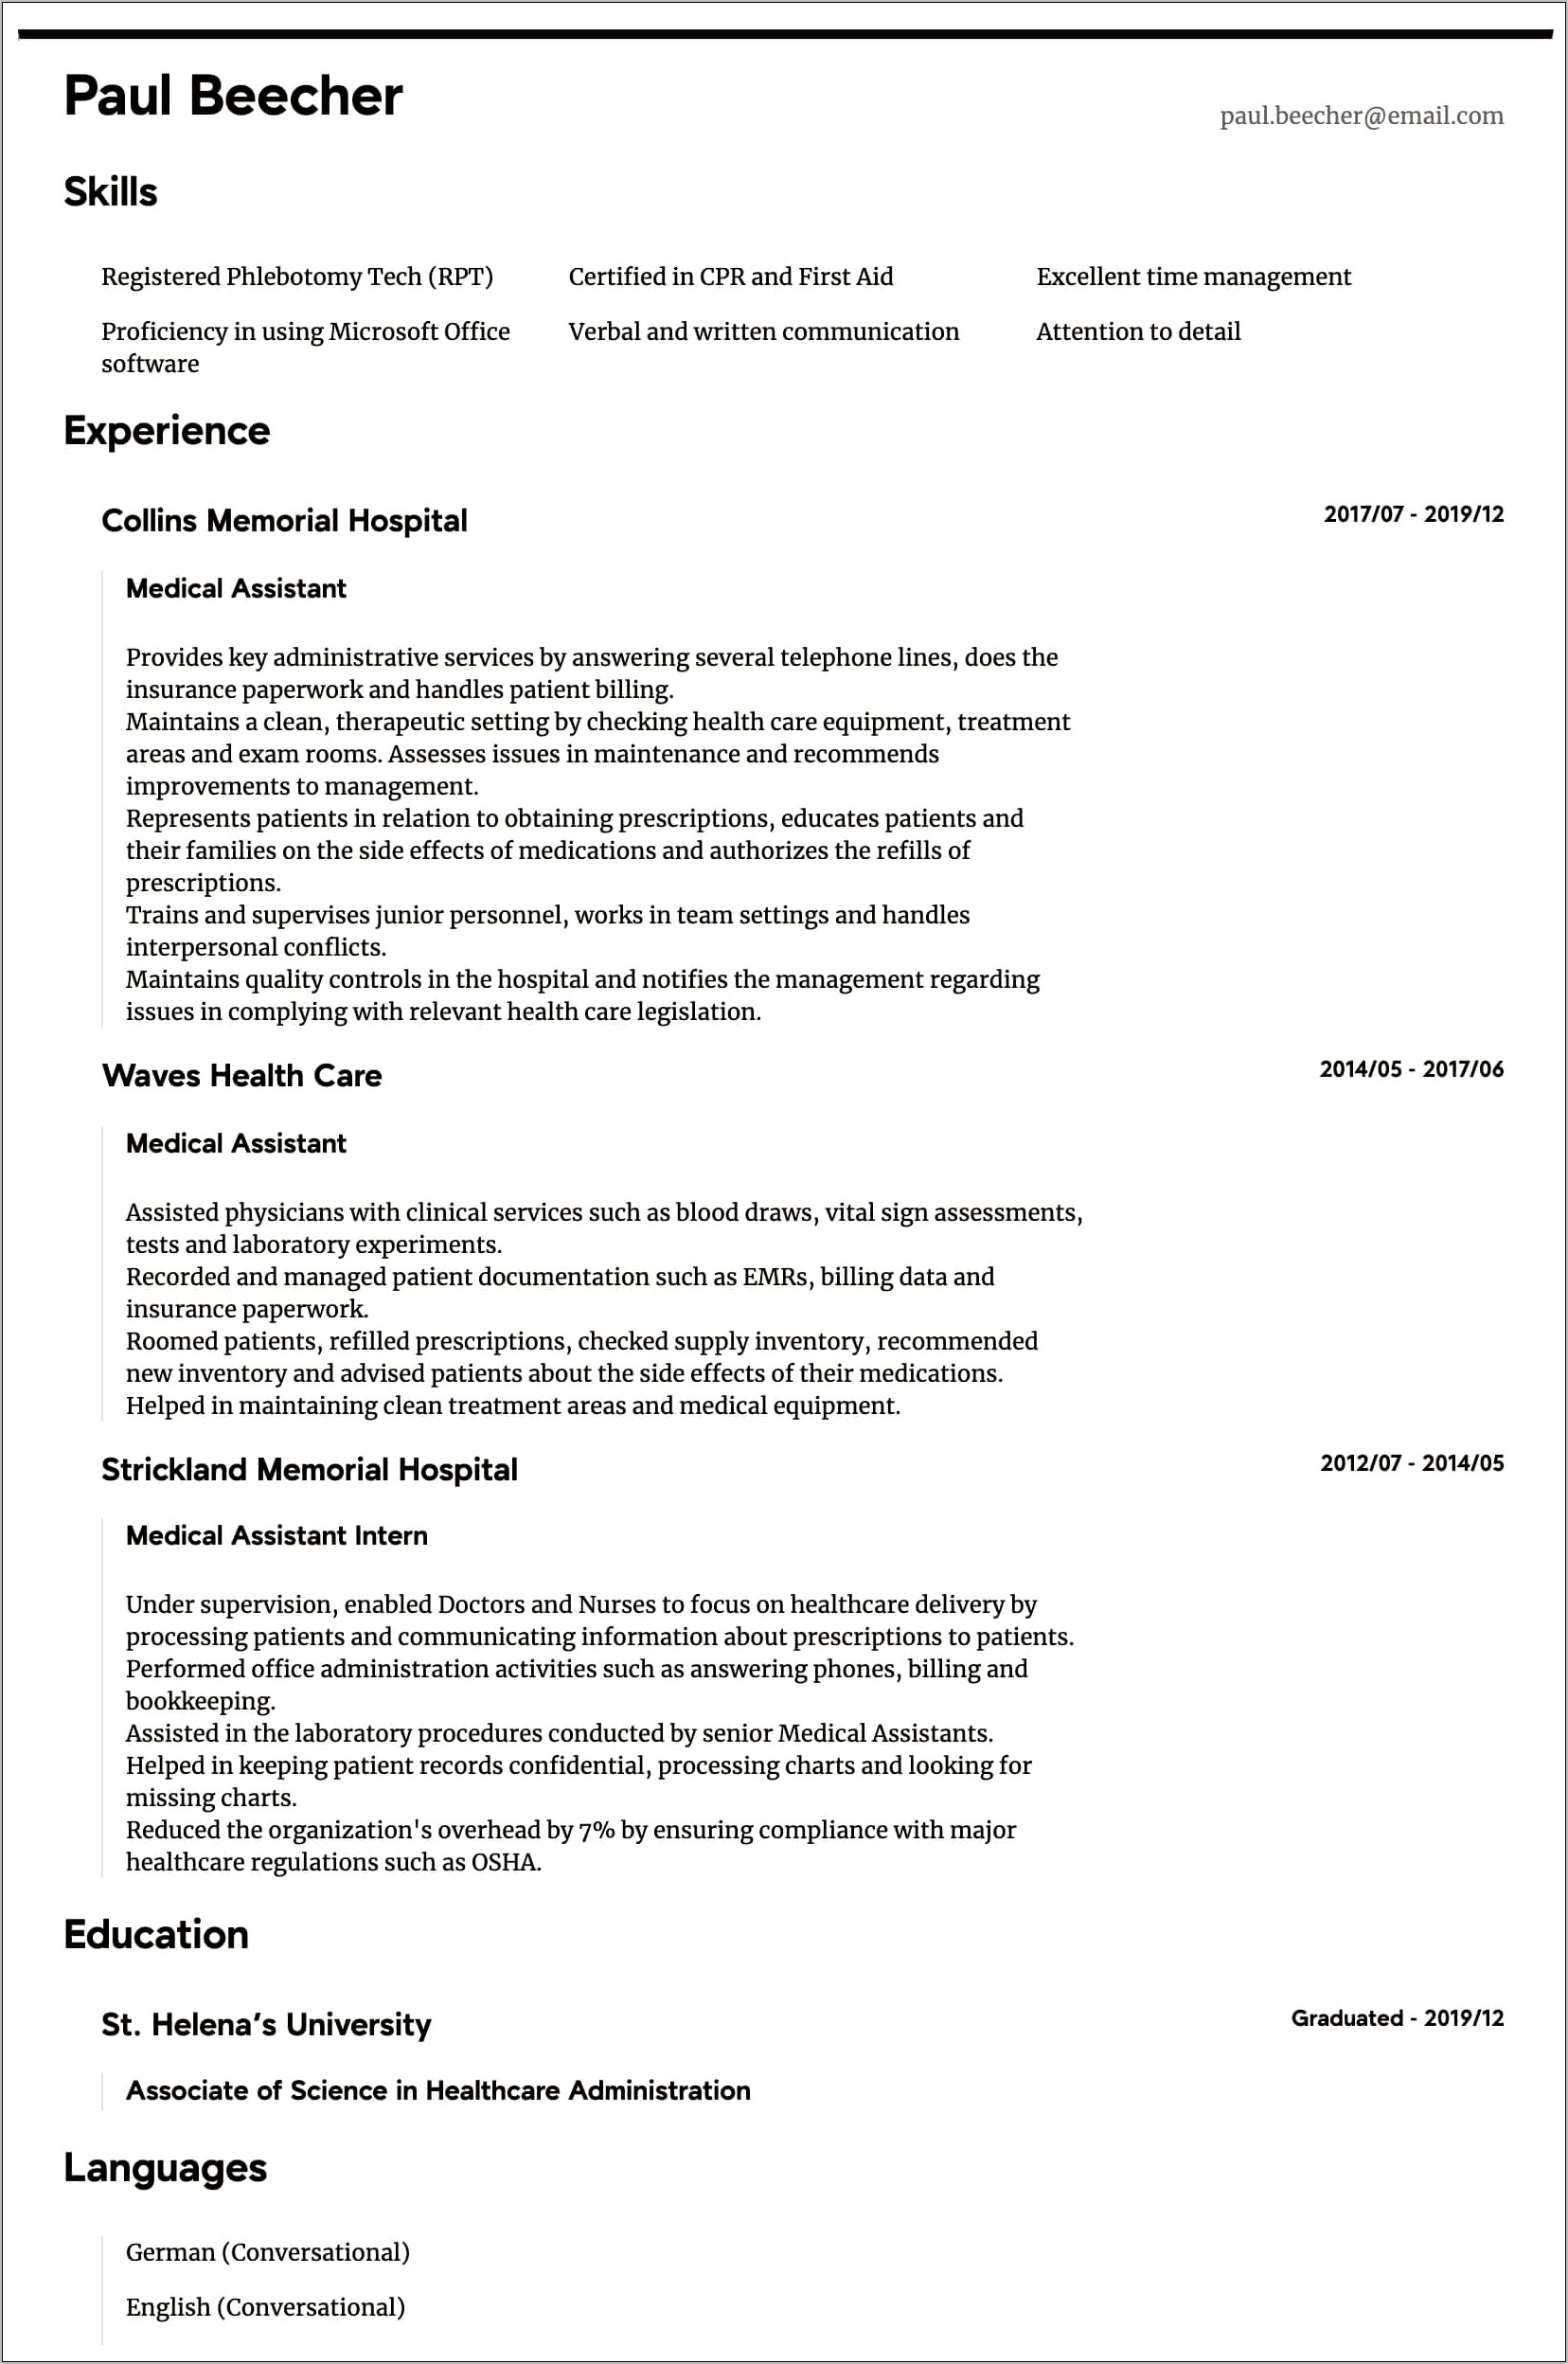 Professional Summary For Medical Assistant Resume